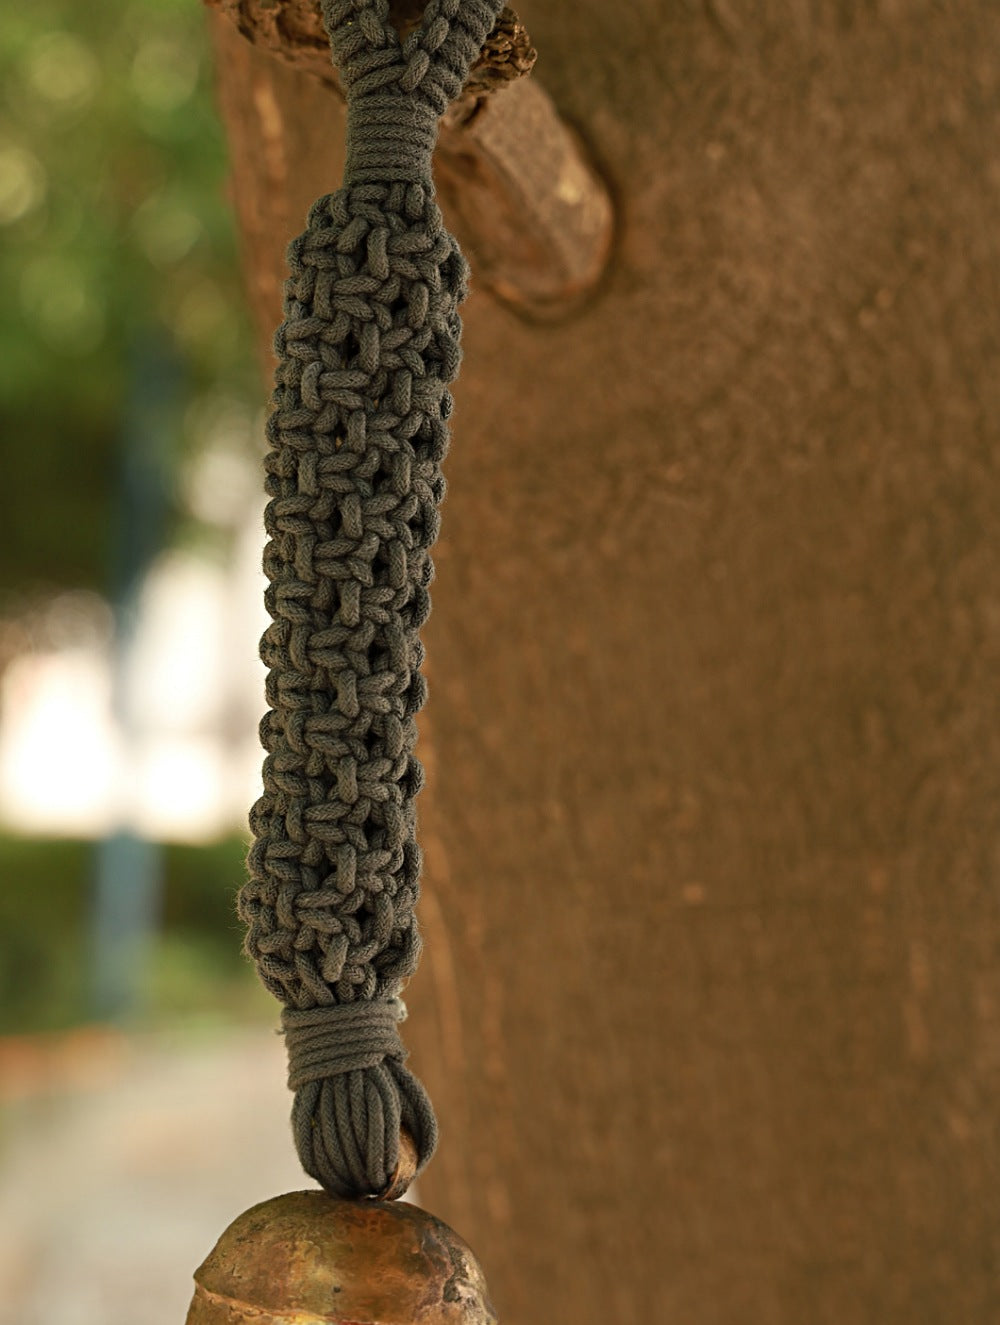 Load image into Gallery viewer, Handknotted Macramé Hanging Copper Bell 2&quot; Dia - Blue (14&quot;)